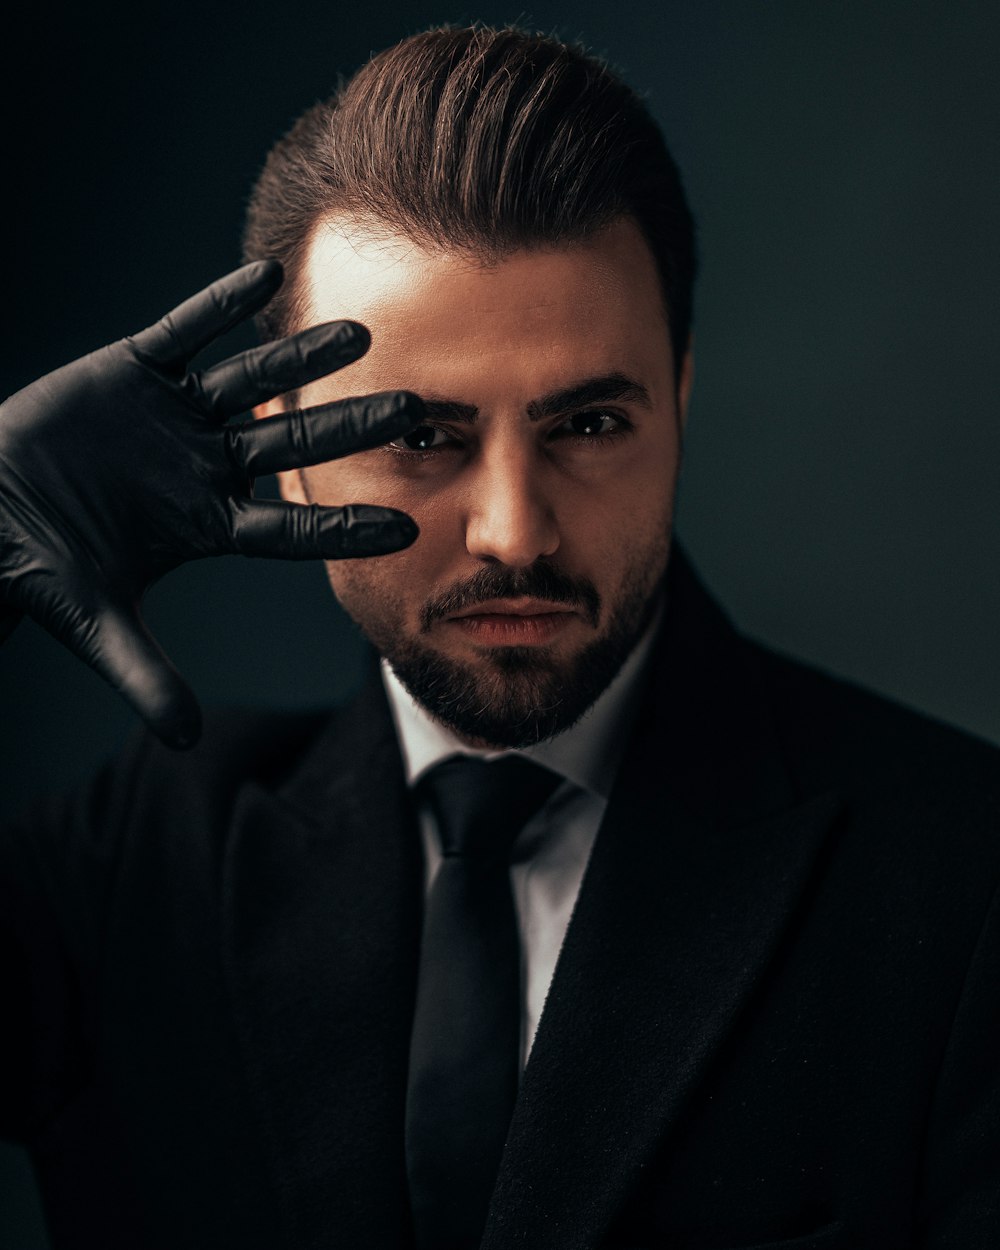 a man in a suit and tie holding his hand to his face